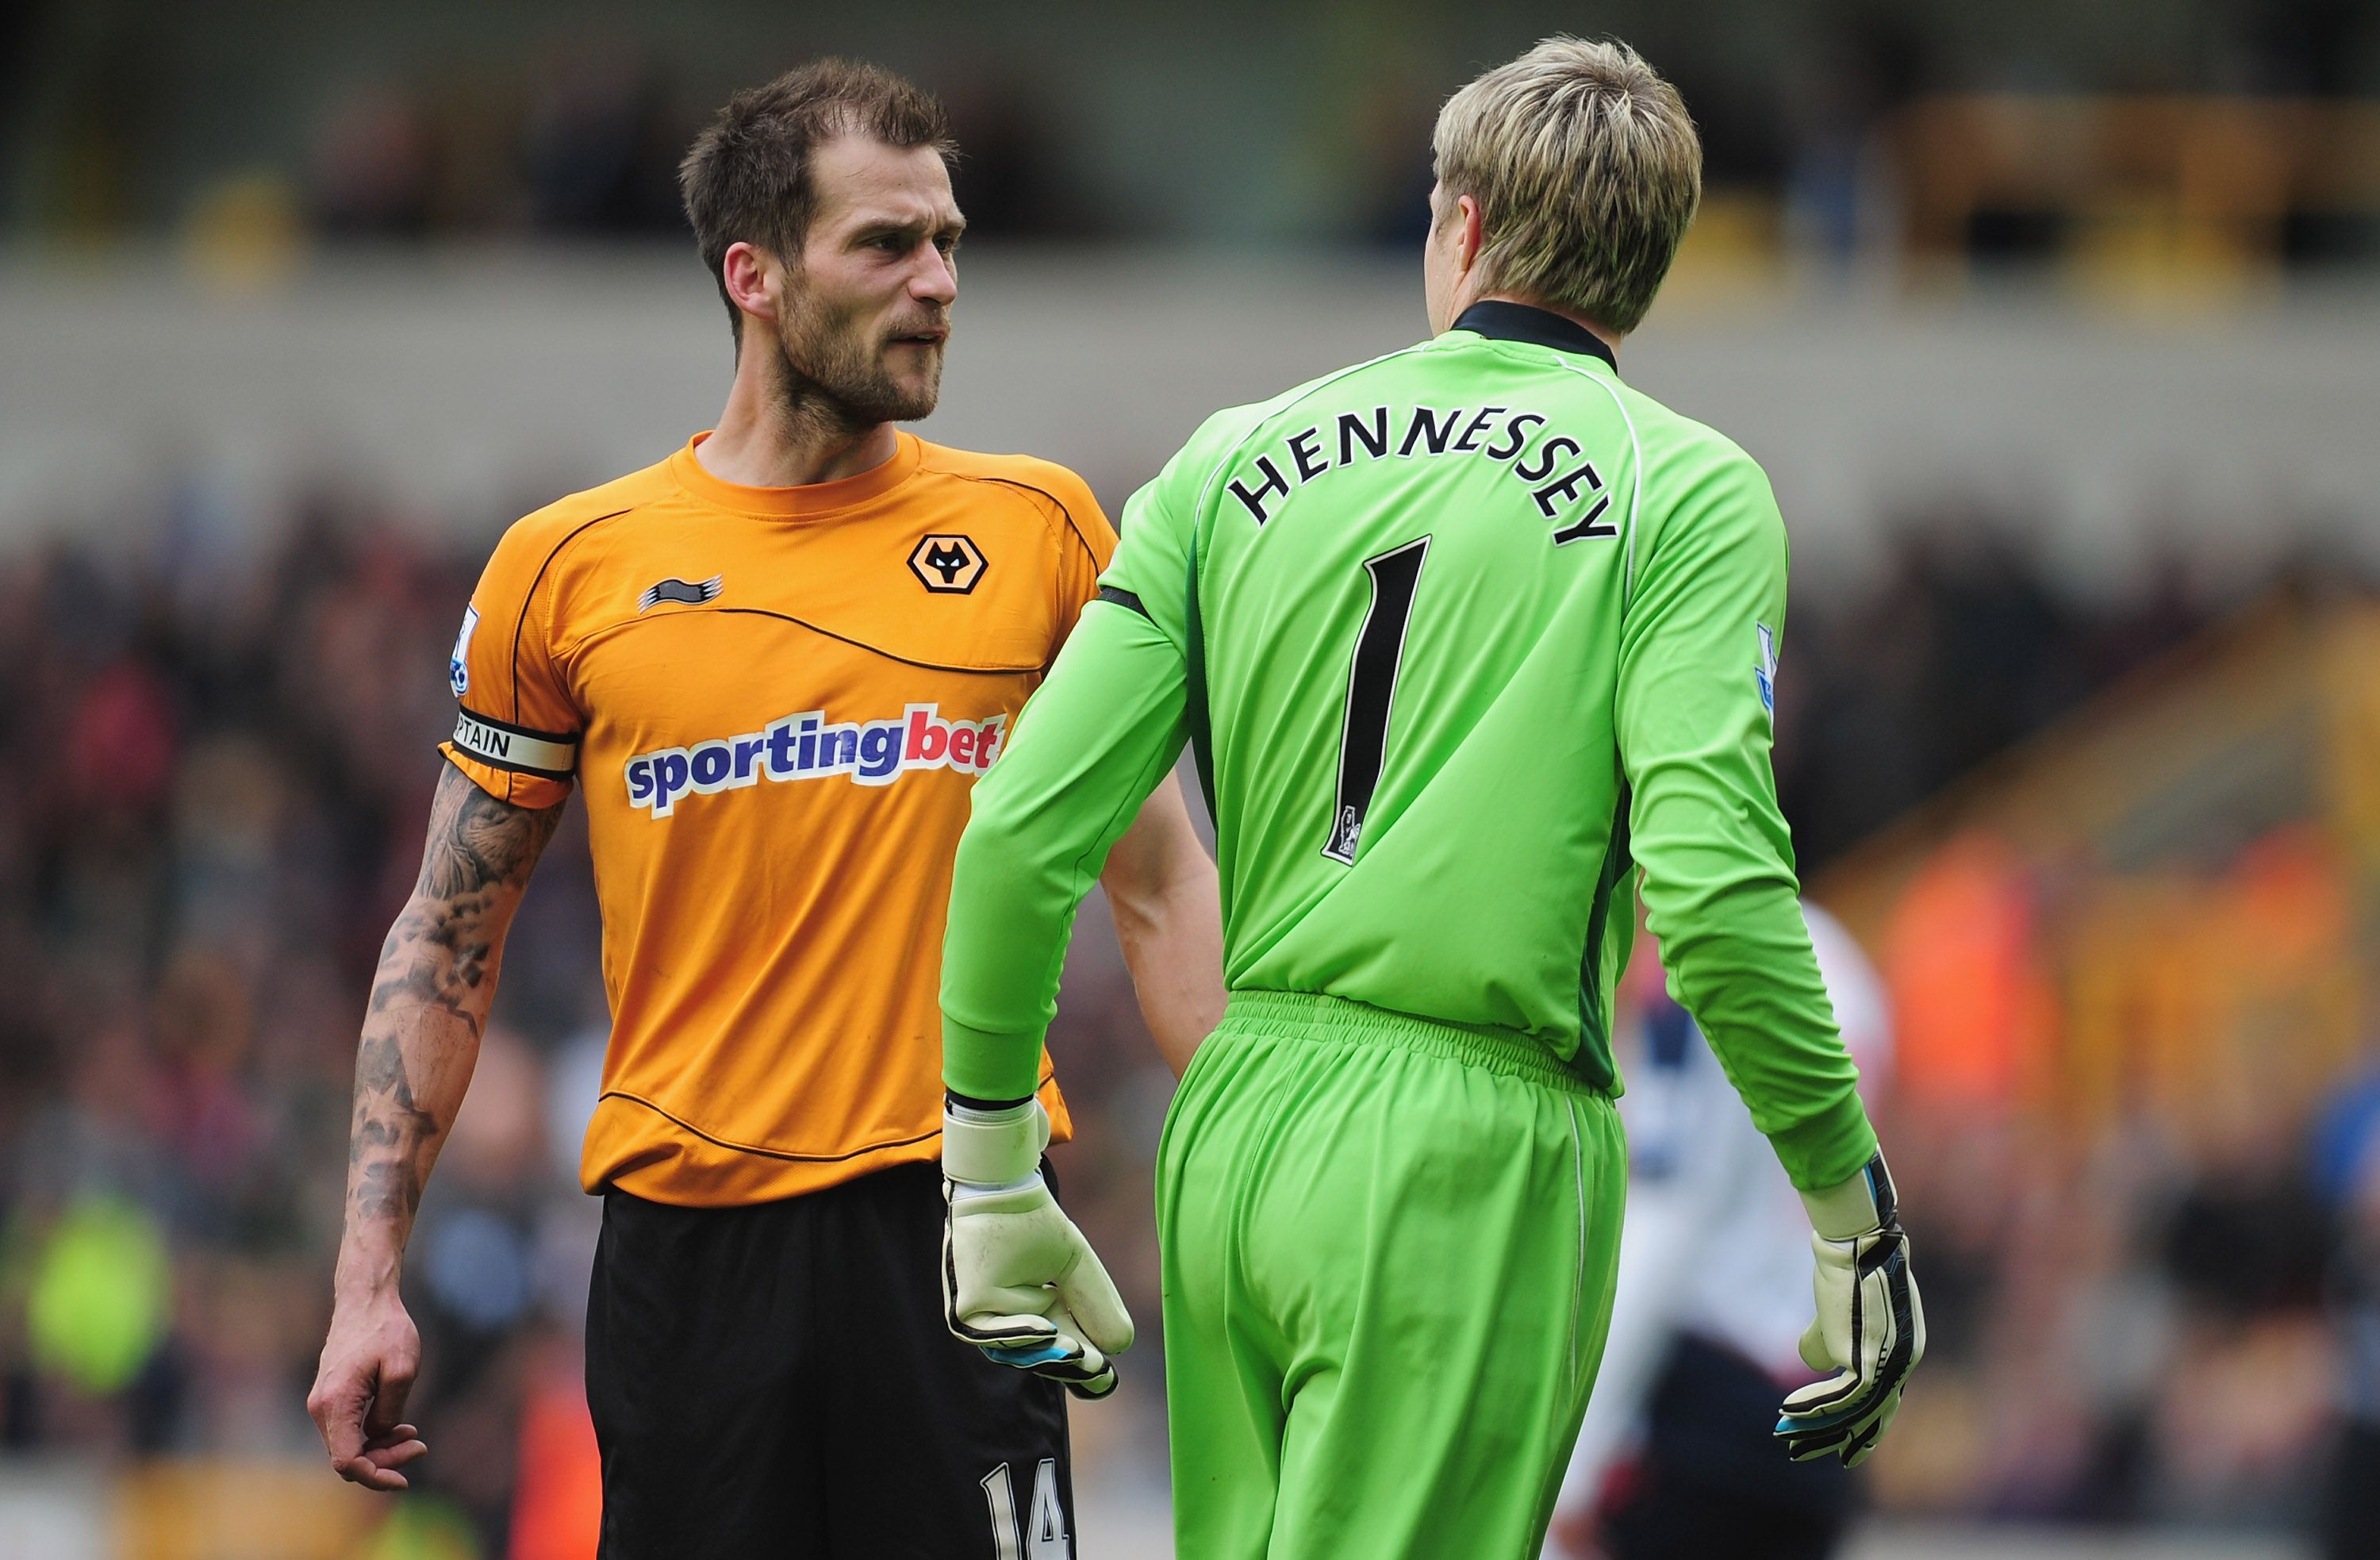 Roger Johnson clashes with his goalkeeper at Wolves.